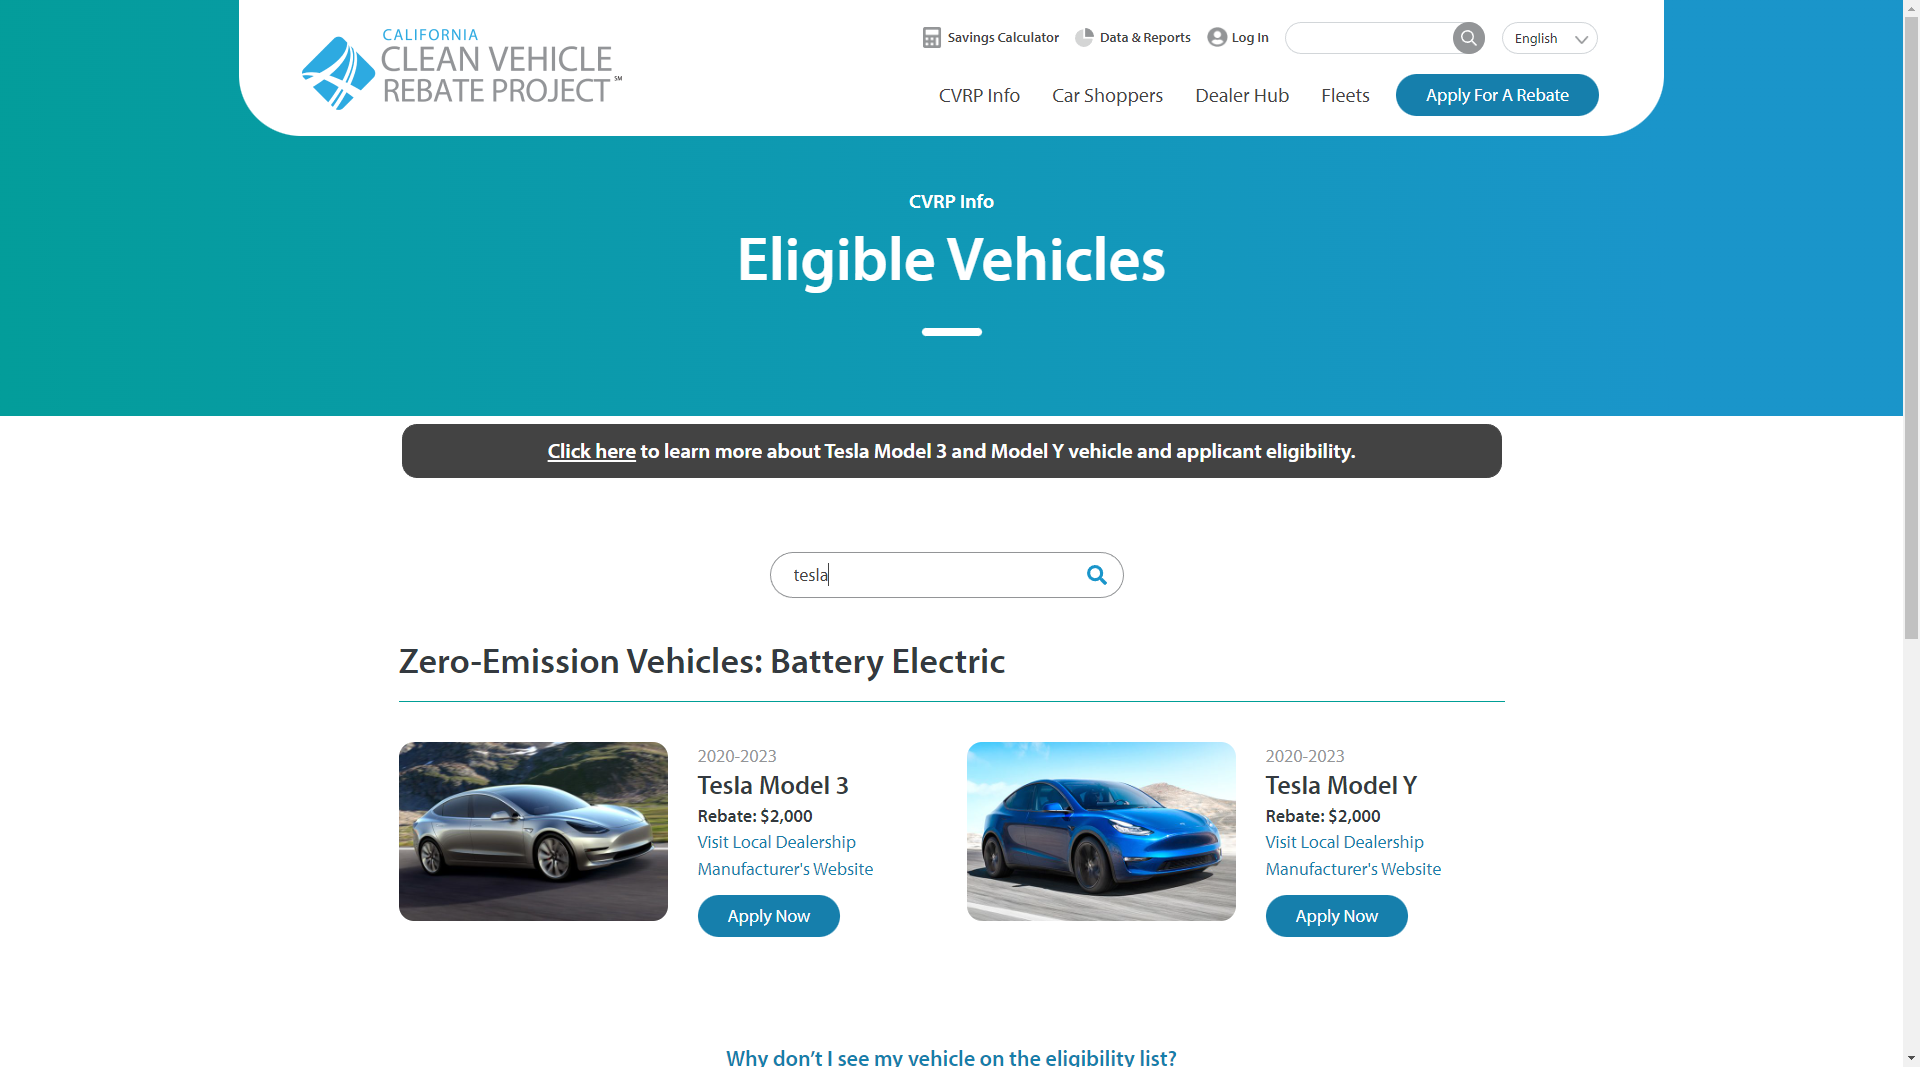 tesla-model-3-and-model-y-re-qualify-for-california-s-2-000-clean